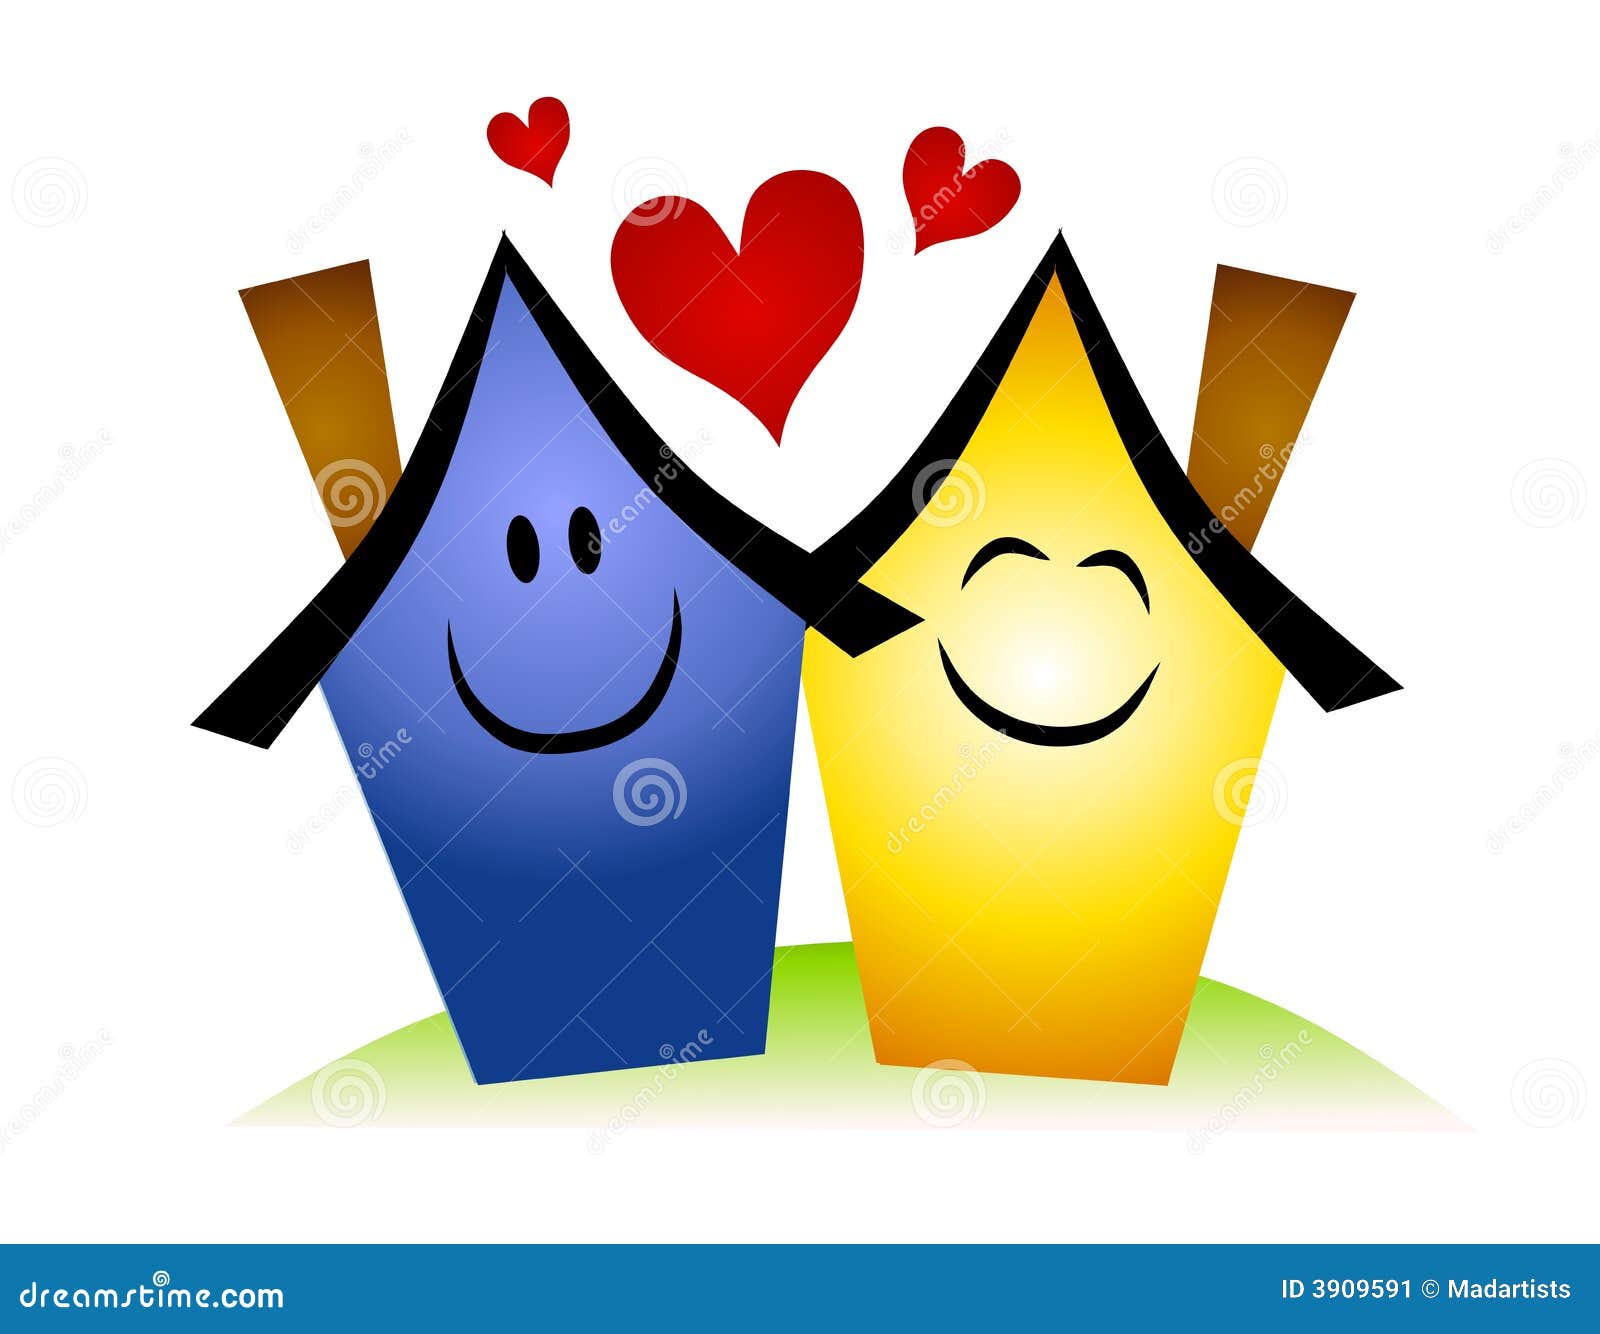 hands holding house clipart - photo #42